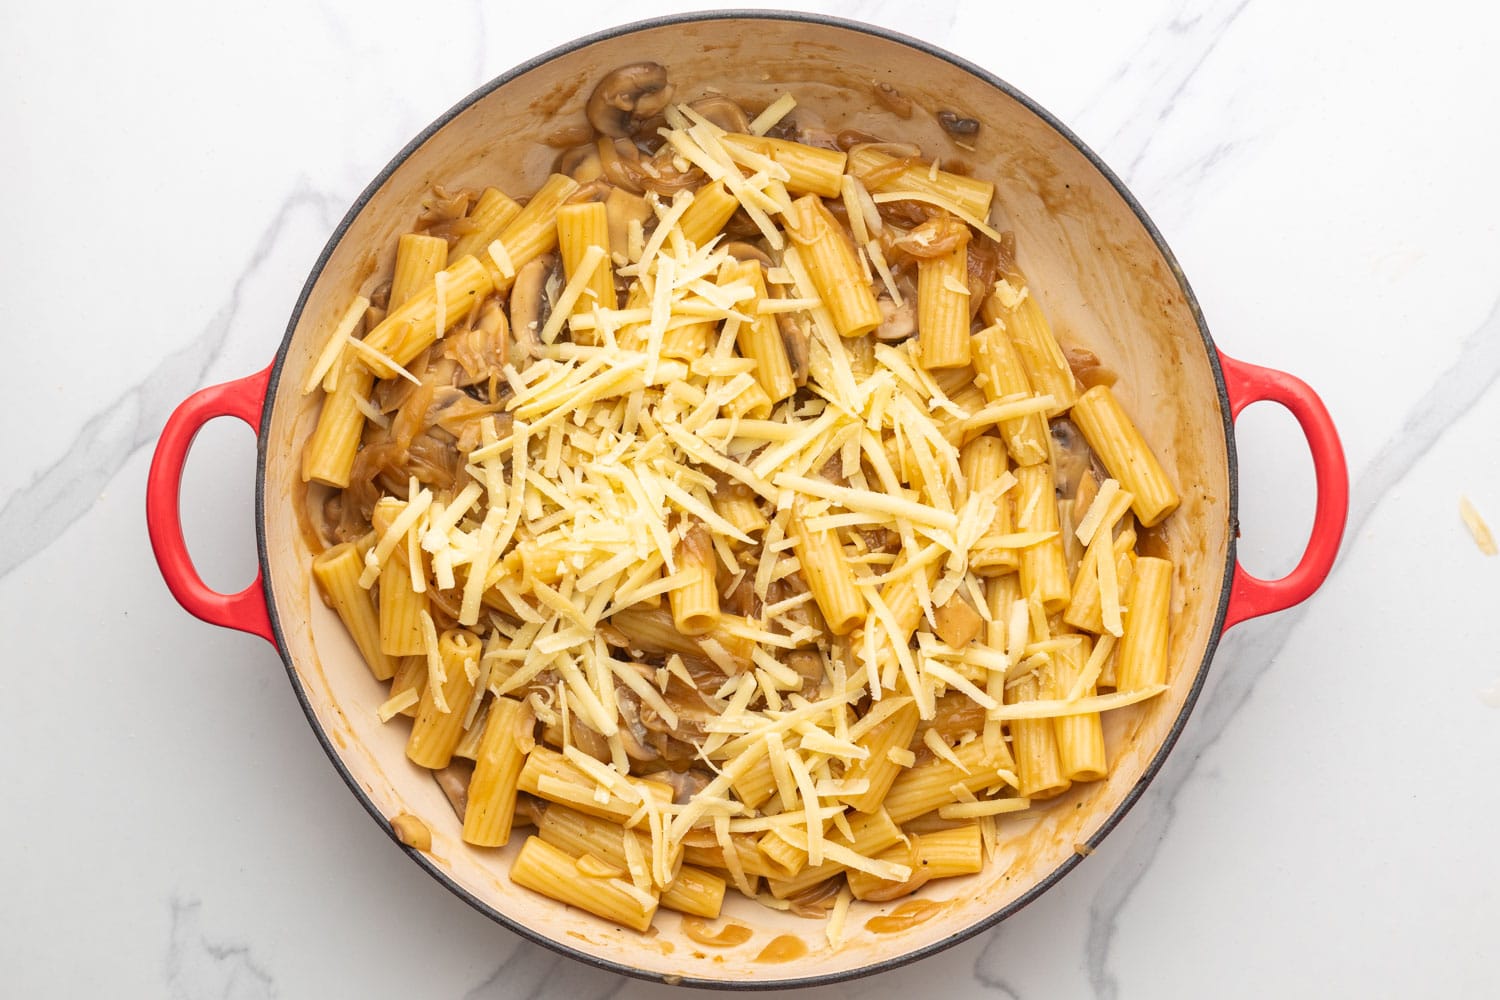 shredded cheese added to french onion pasta.